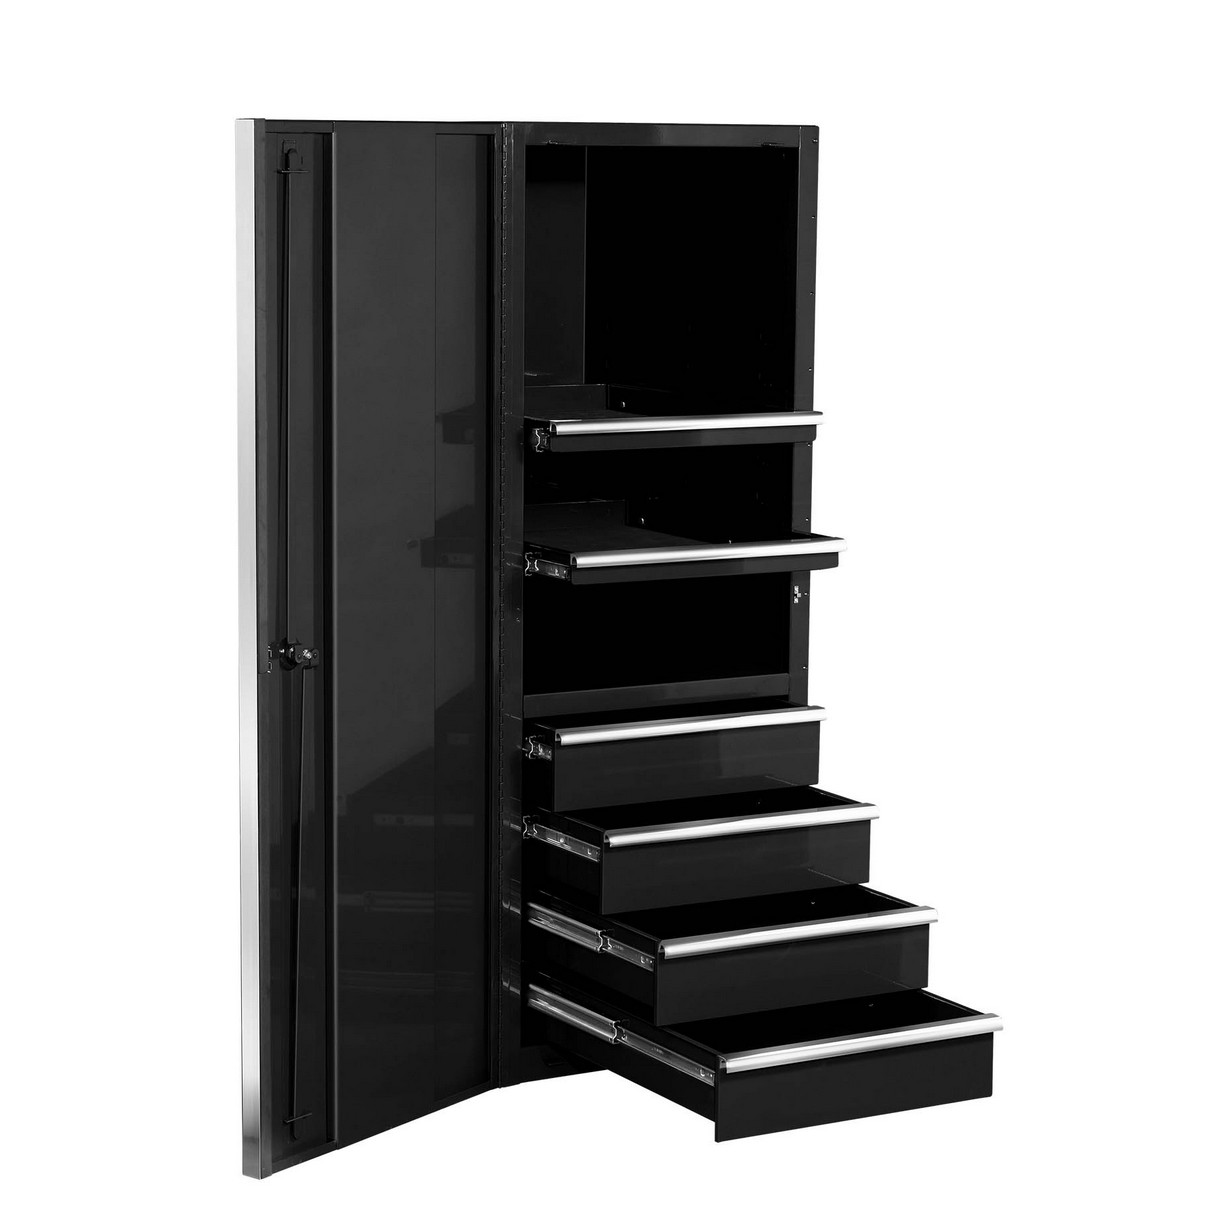 3 Inch x 24 Inch Tool Cabinet Drawer Partition